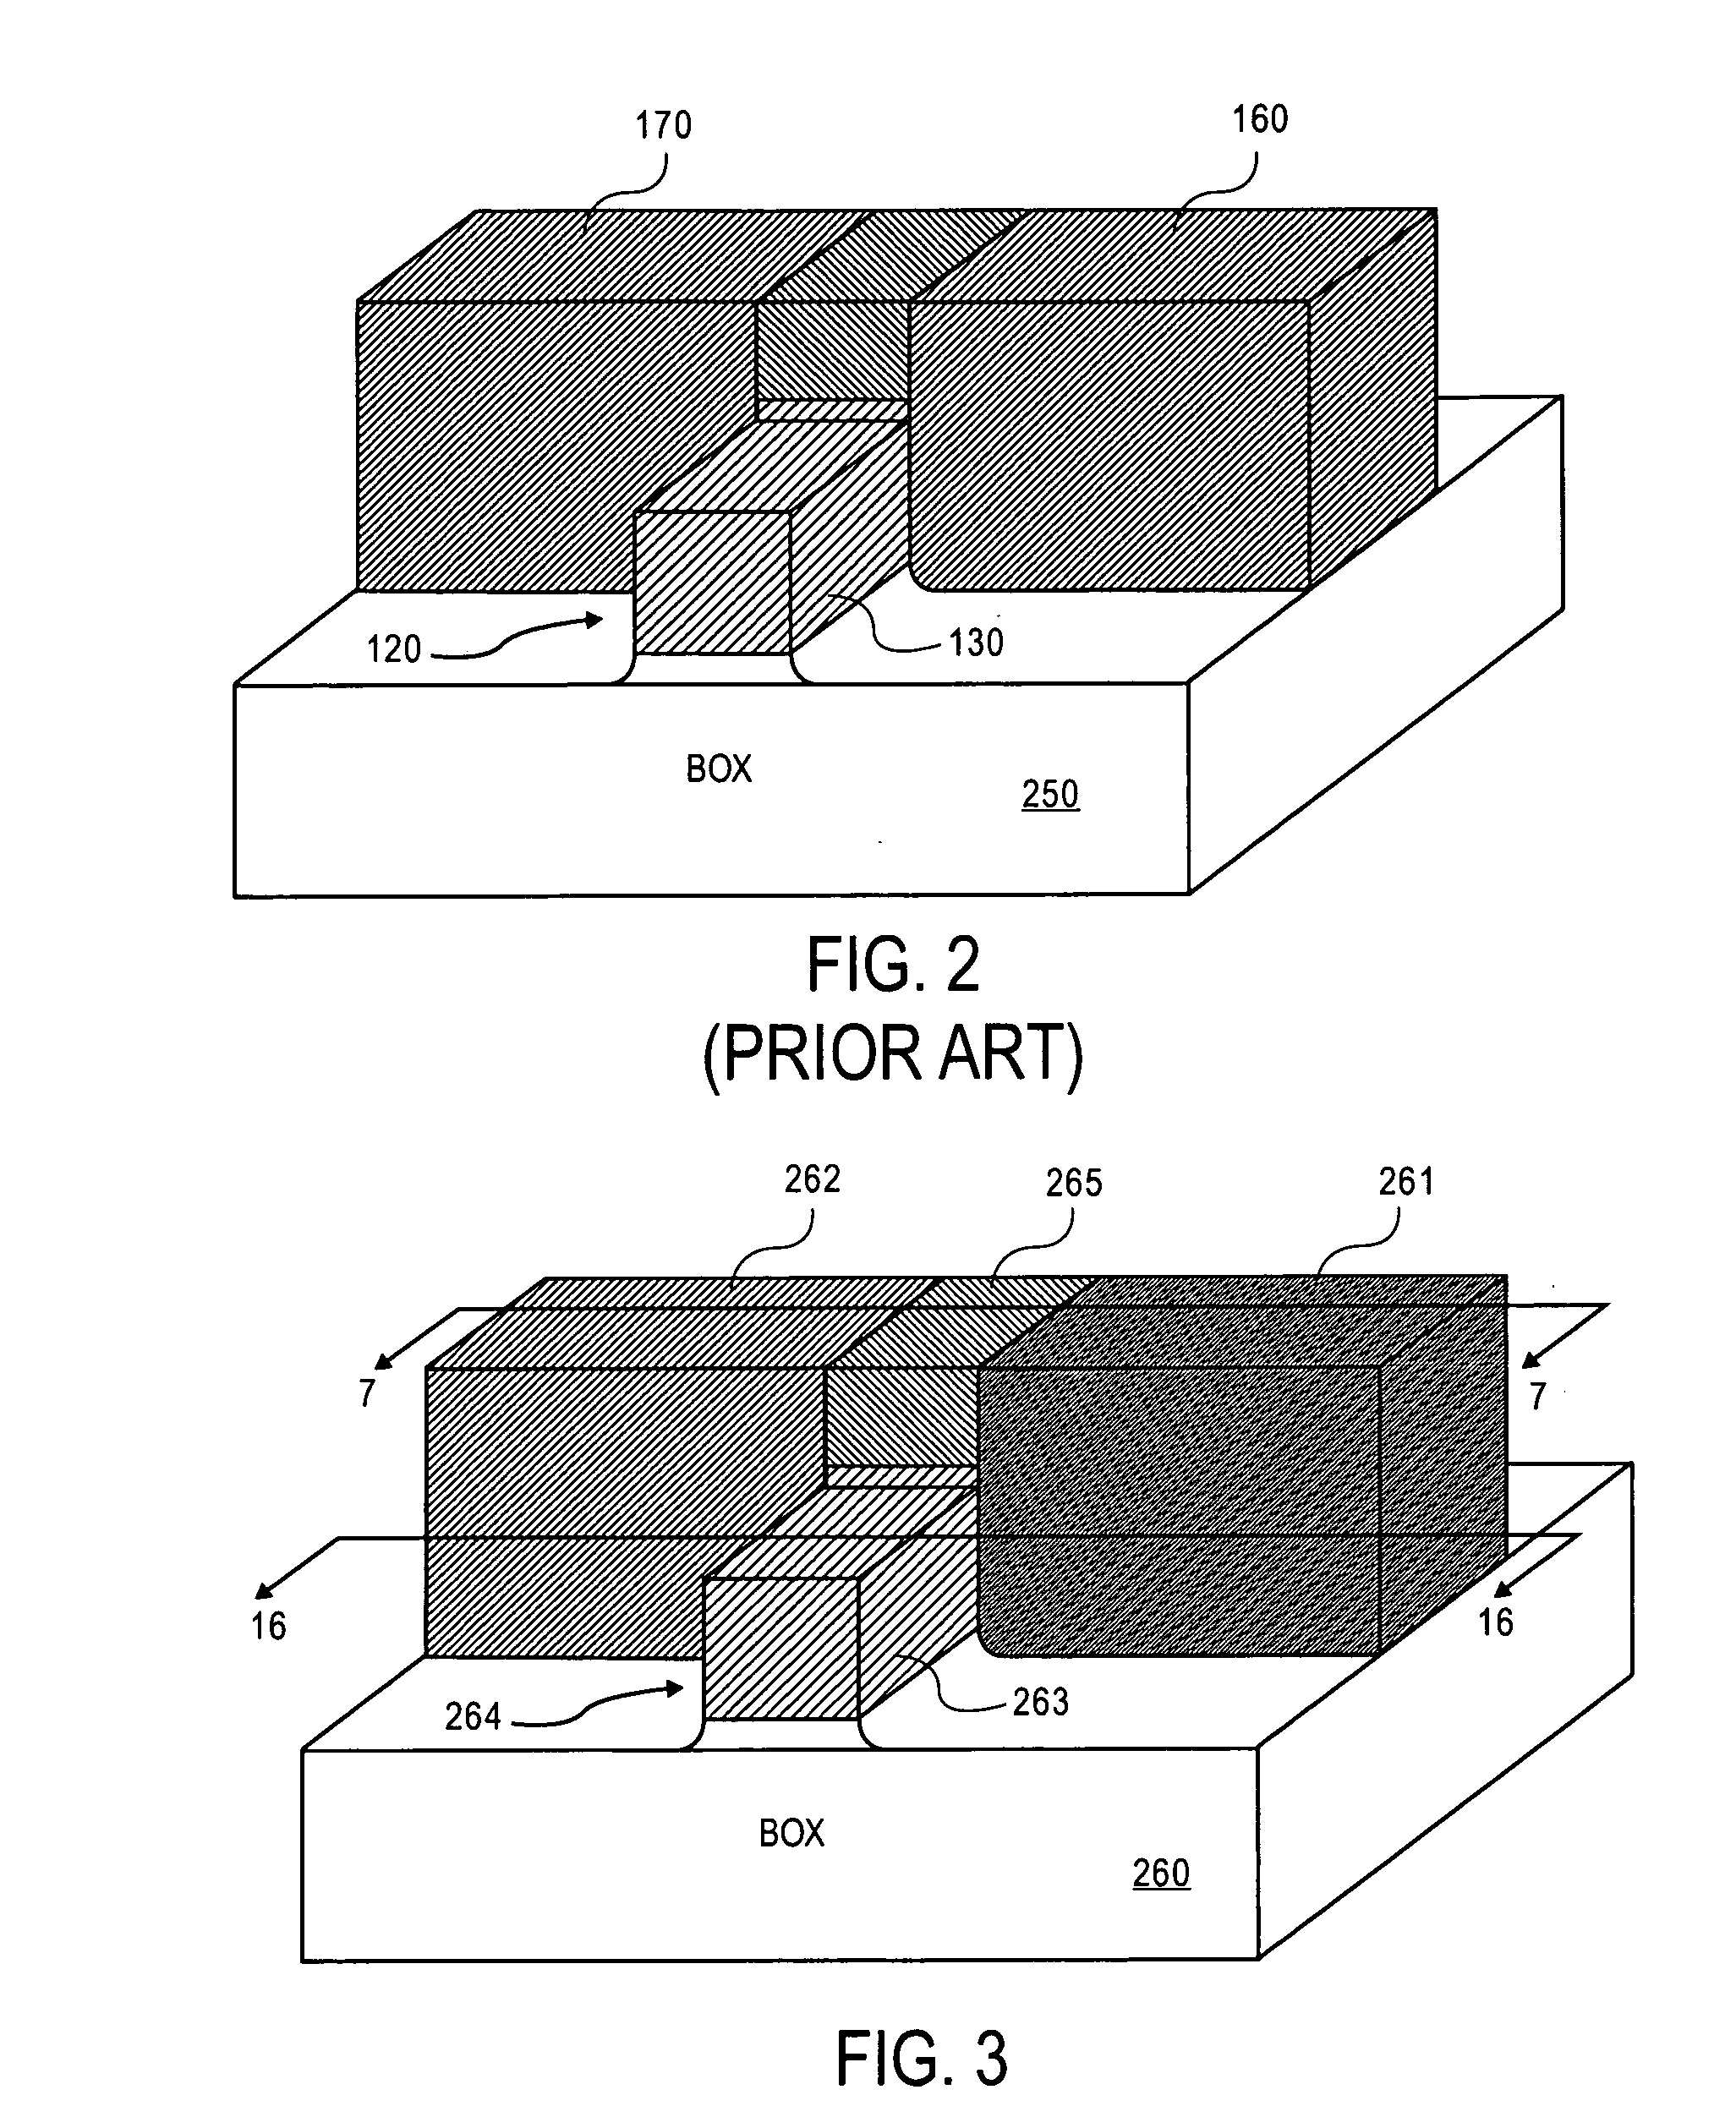 Floating body memory cell having gates favoring different conductivity type regions